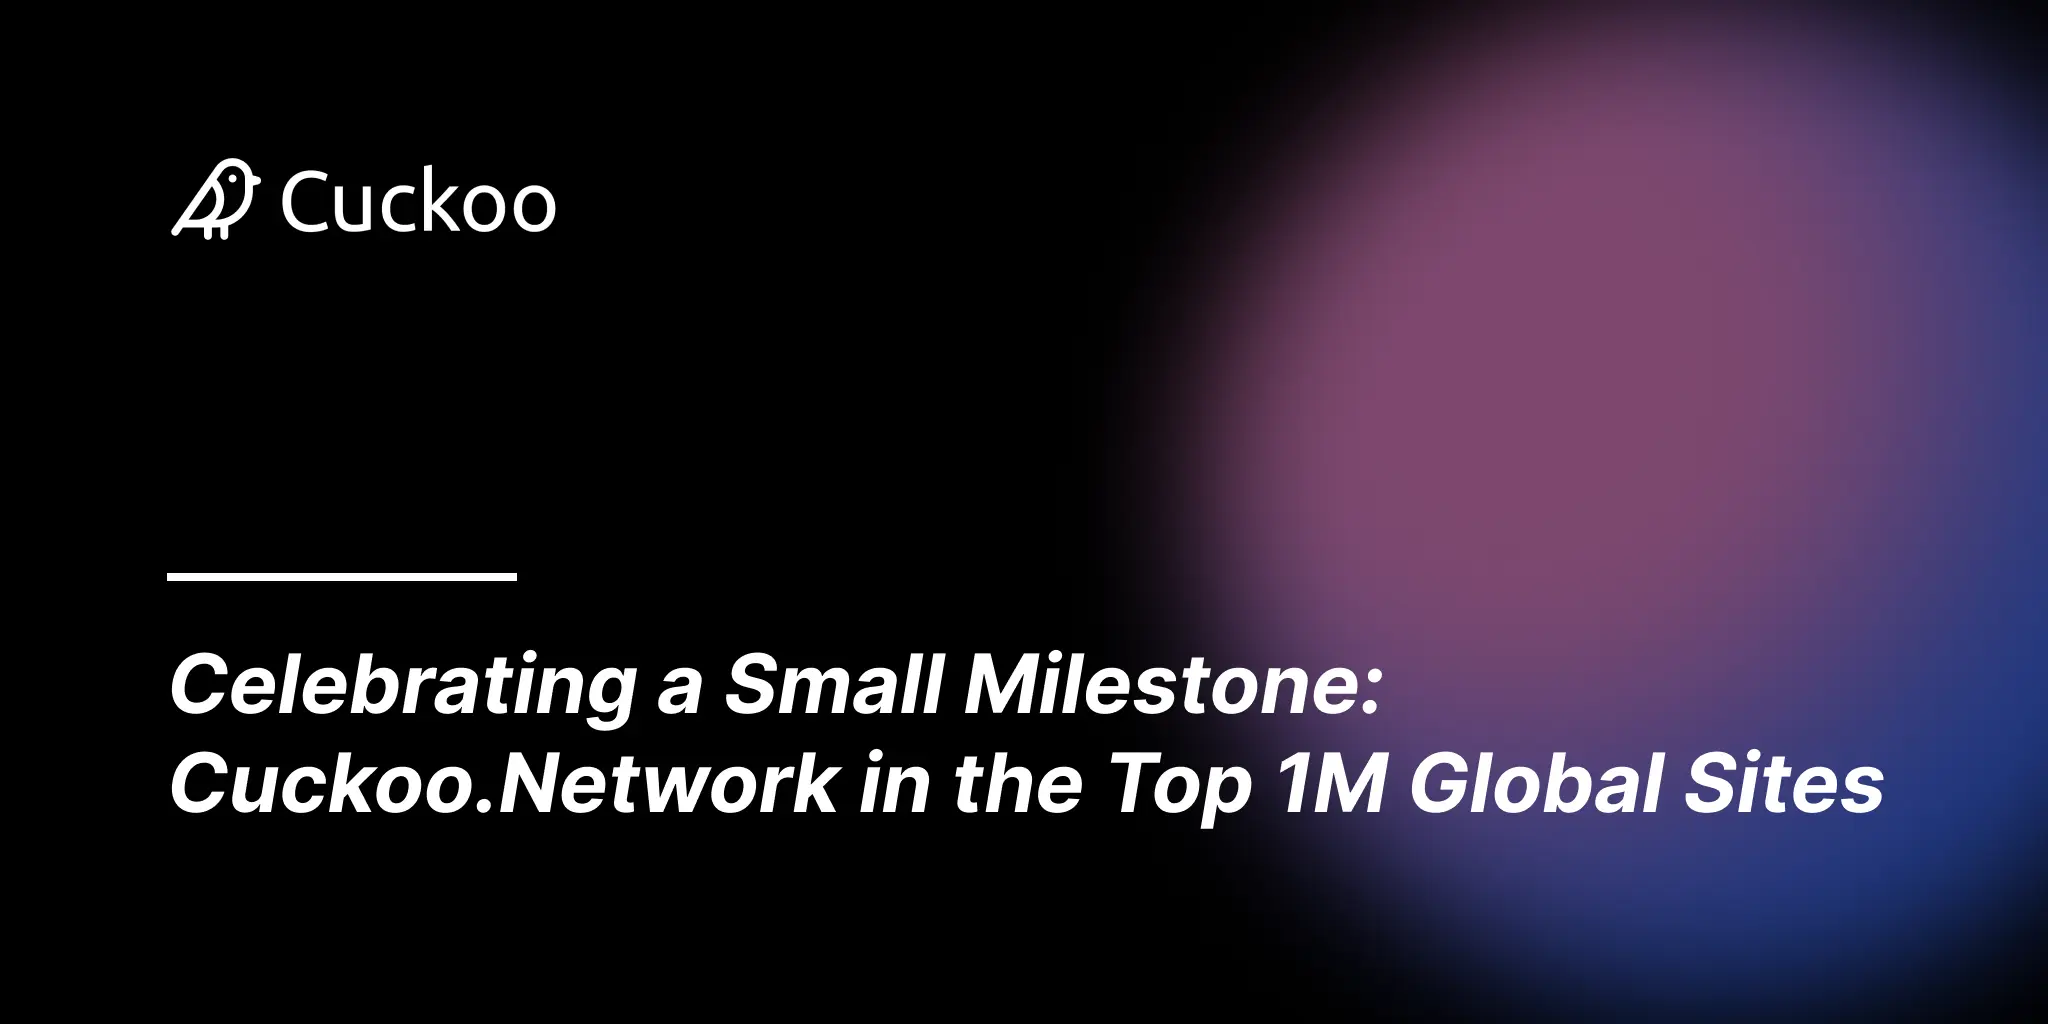 Celebrating a Small Milestone: Cuckoo.Network in the Top 1M Global Sites